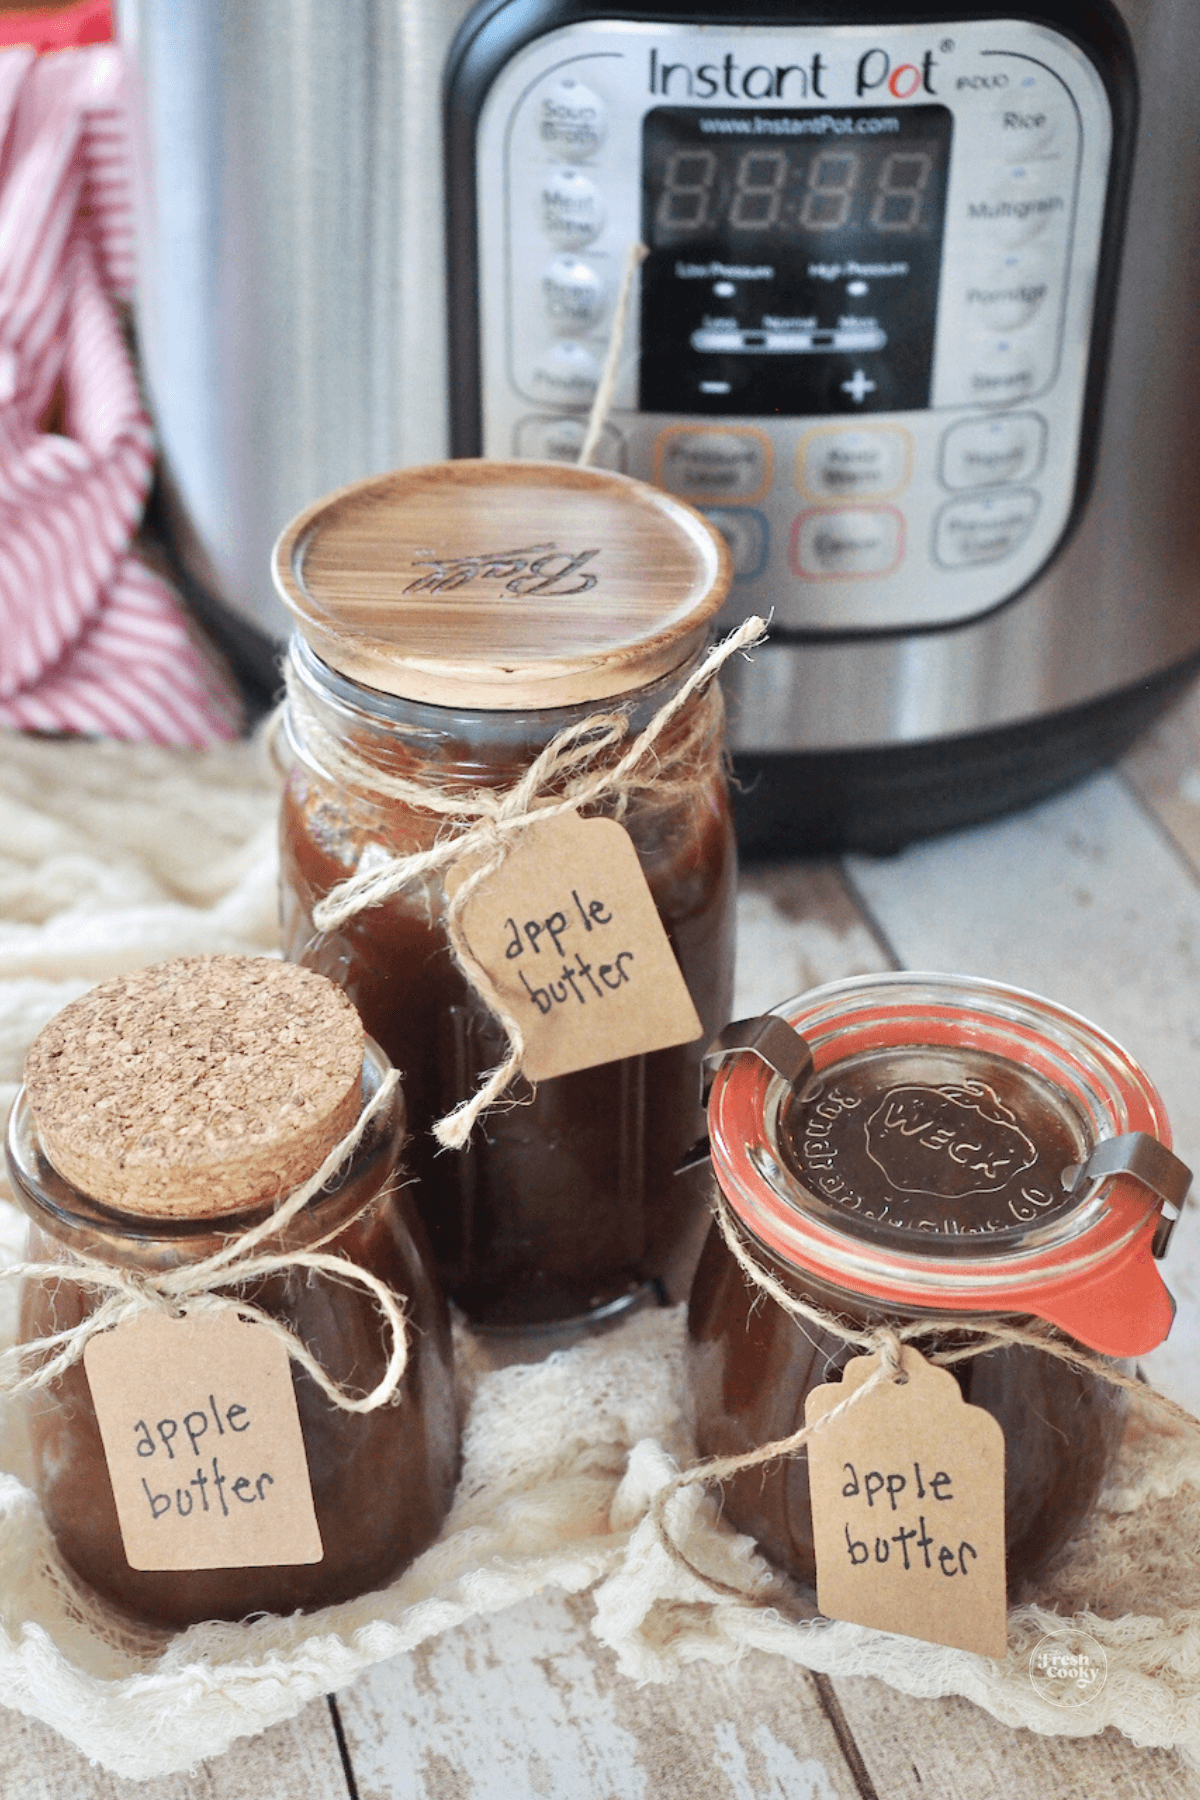 Apple butter in jars with labels and instant pot in background.